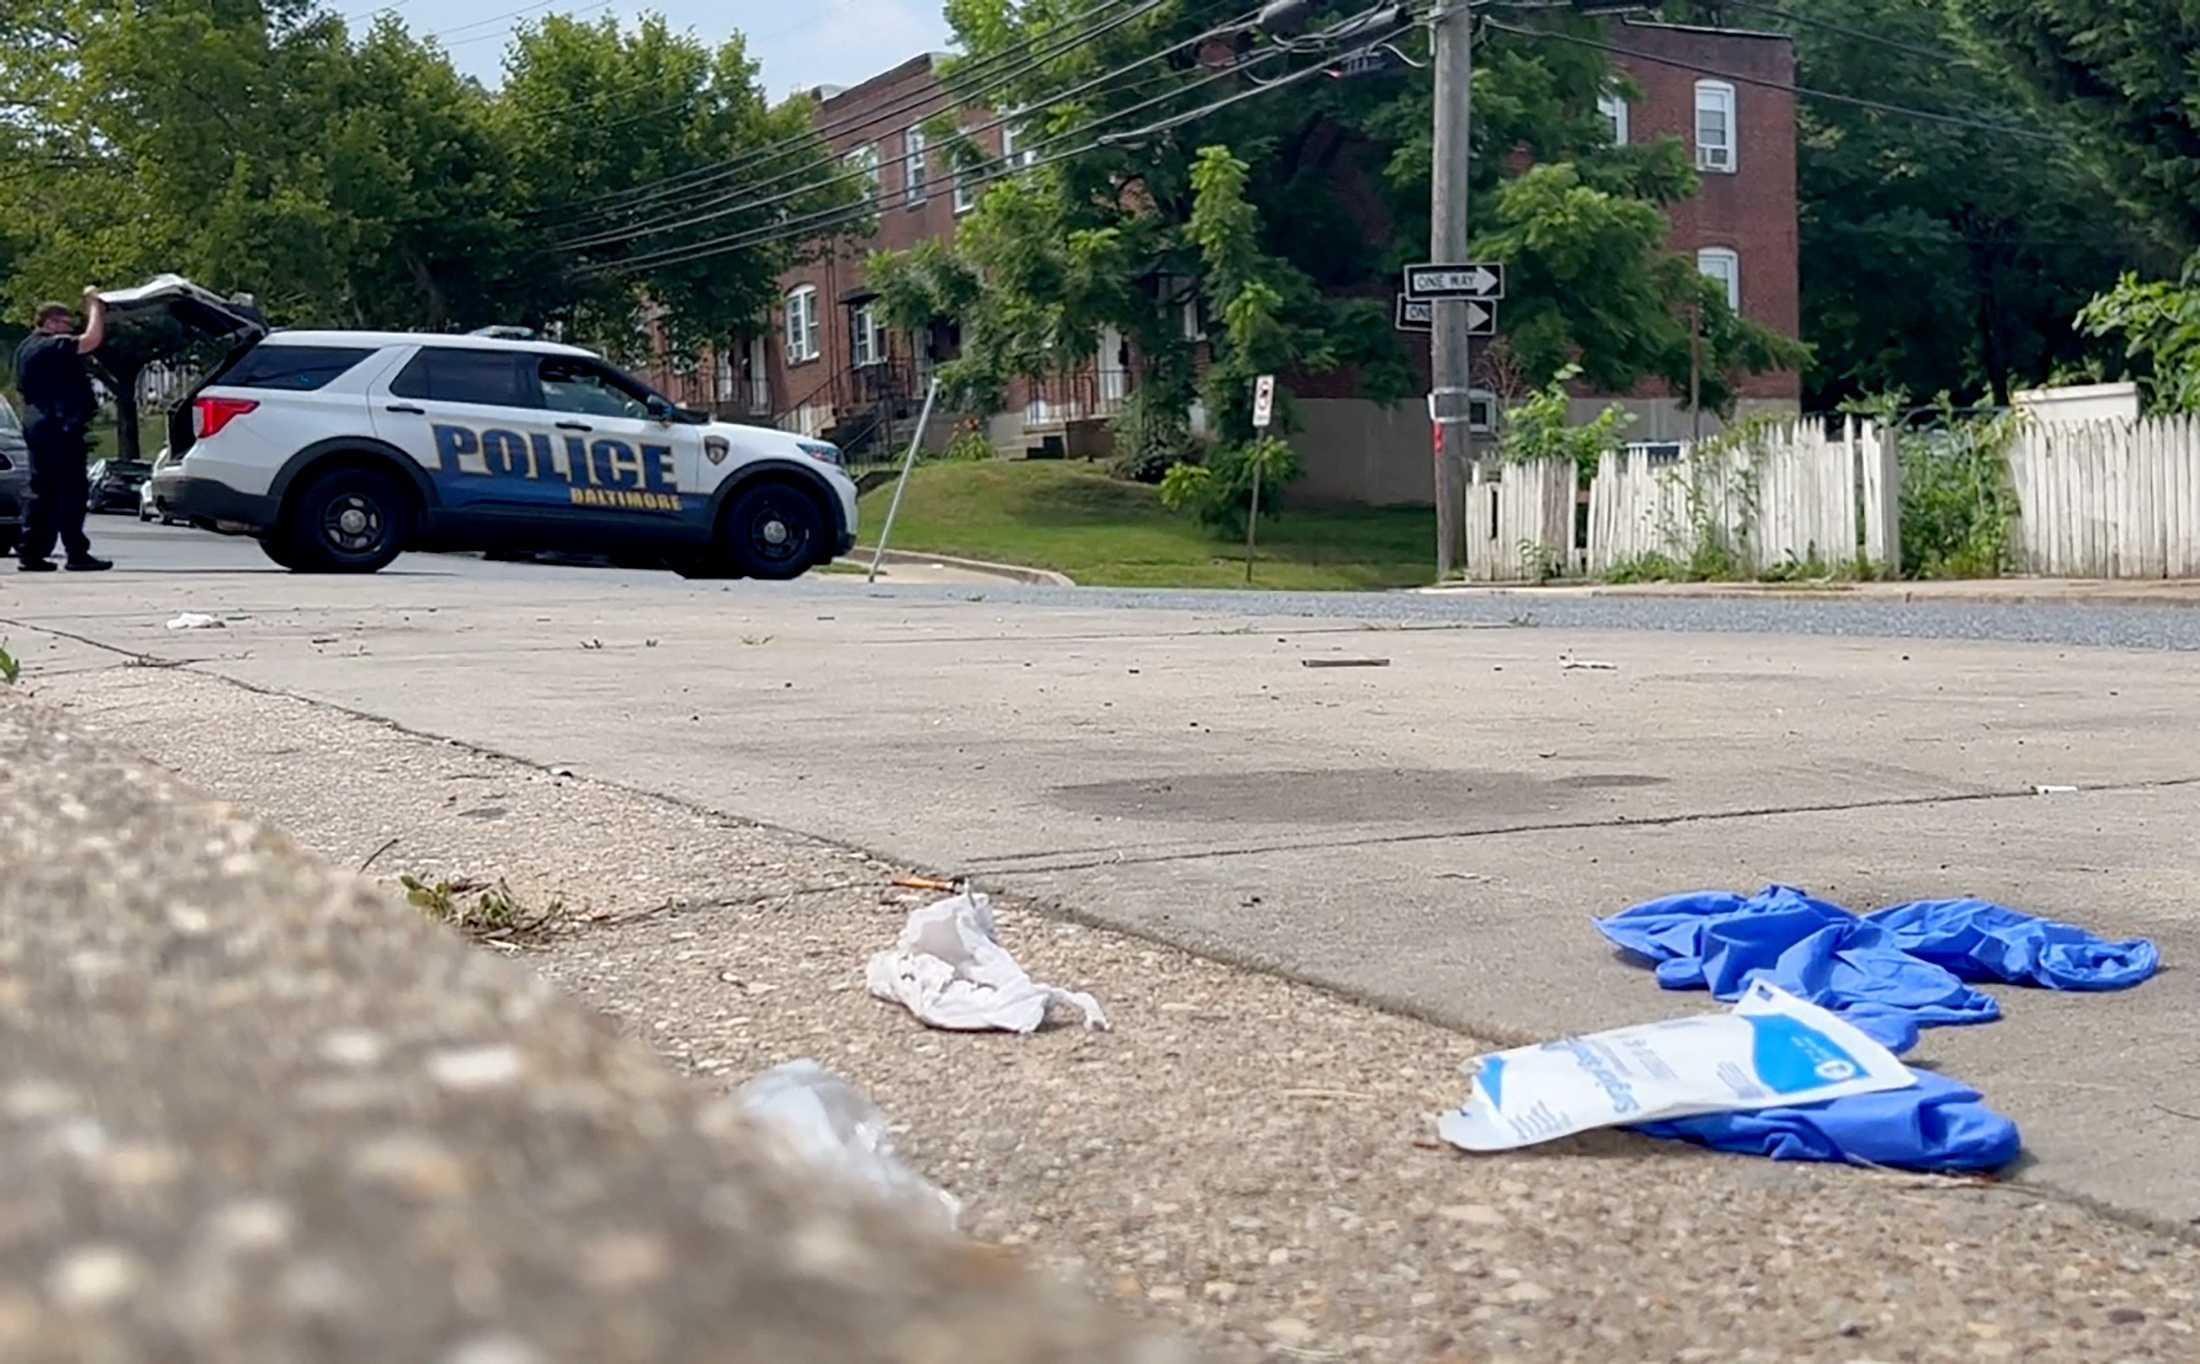 Police investigate after a mass shooting at the scene of a Fourth of July holiday weekend block party in Baltimore, Maryland, US July 2. Photo: Reuters